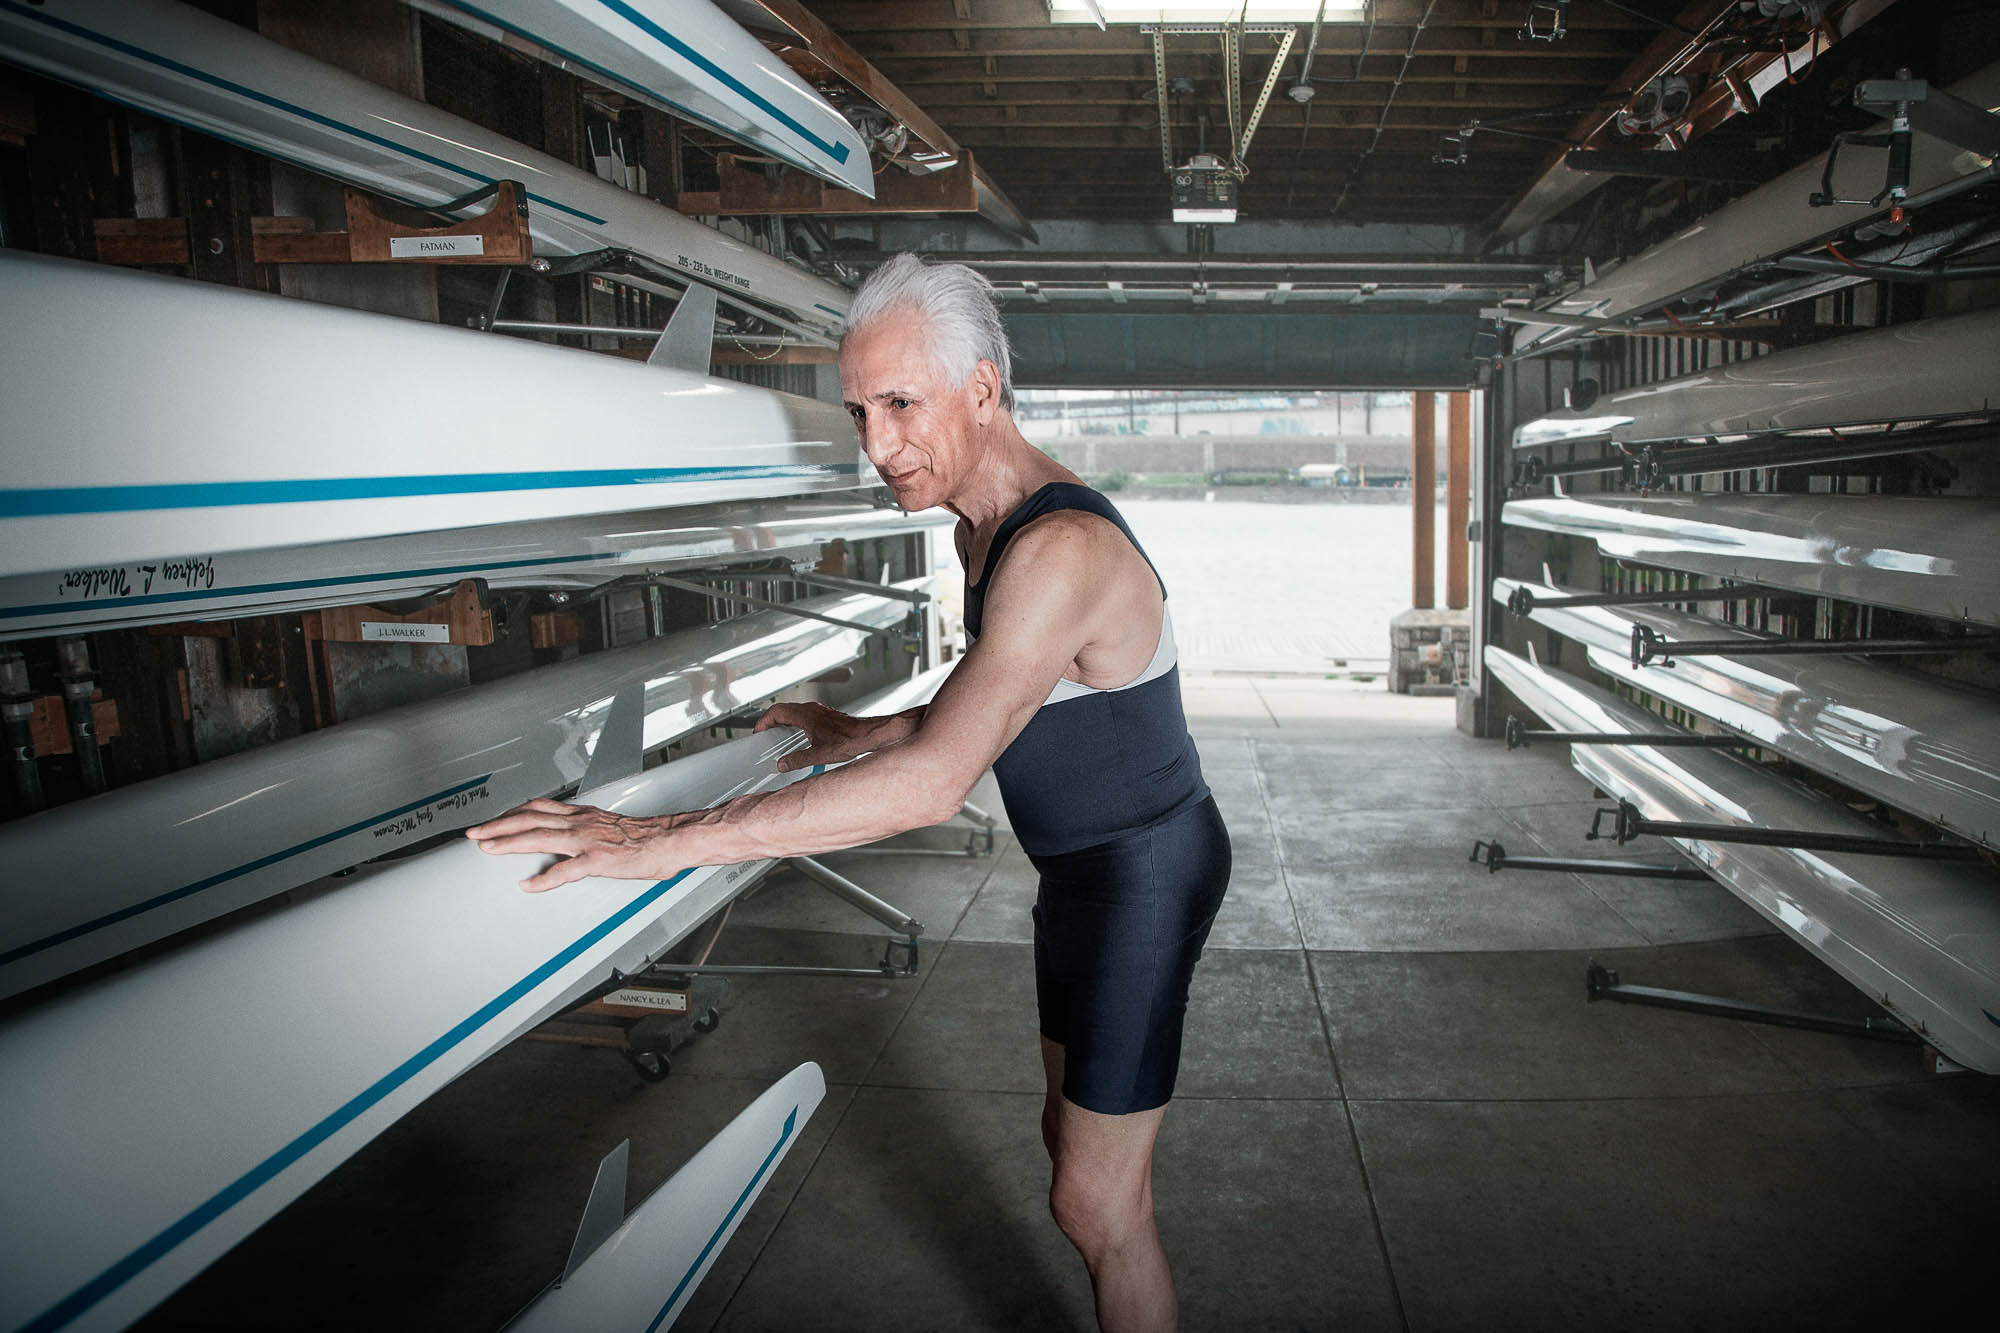 active senior citizen using his rowing hobby to stay strong